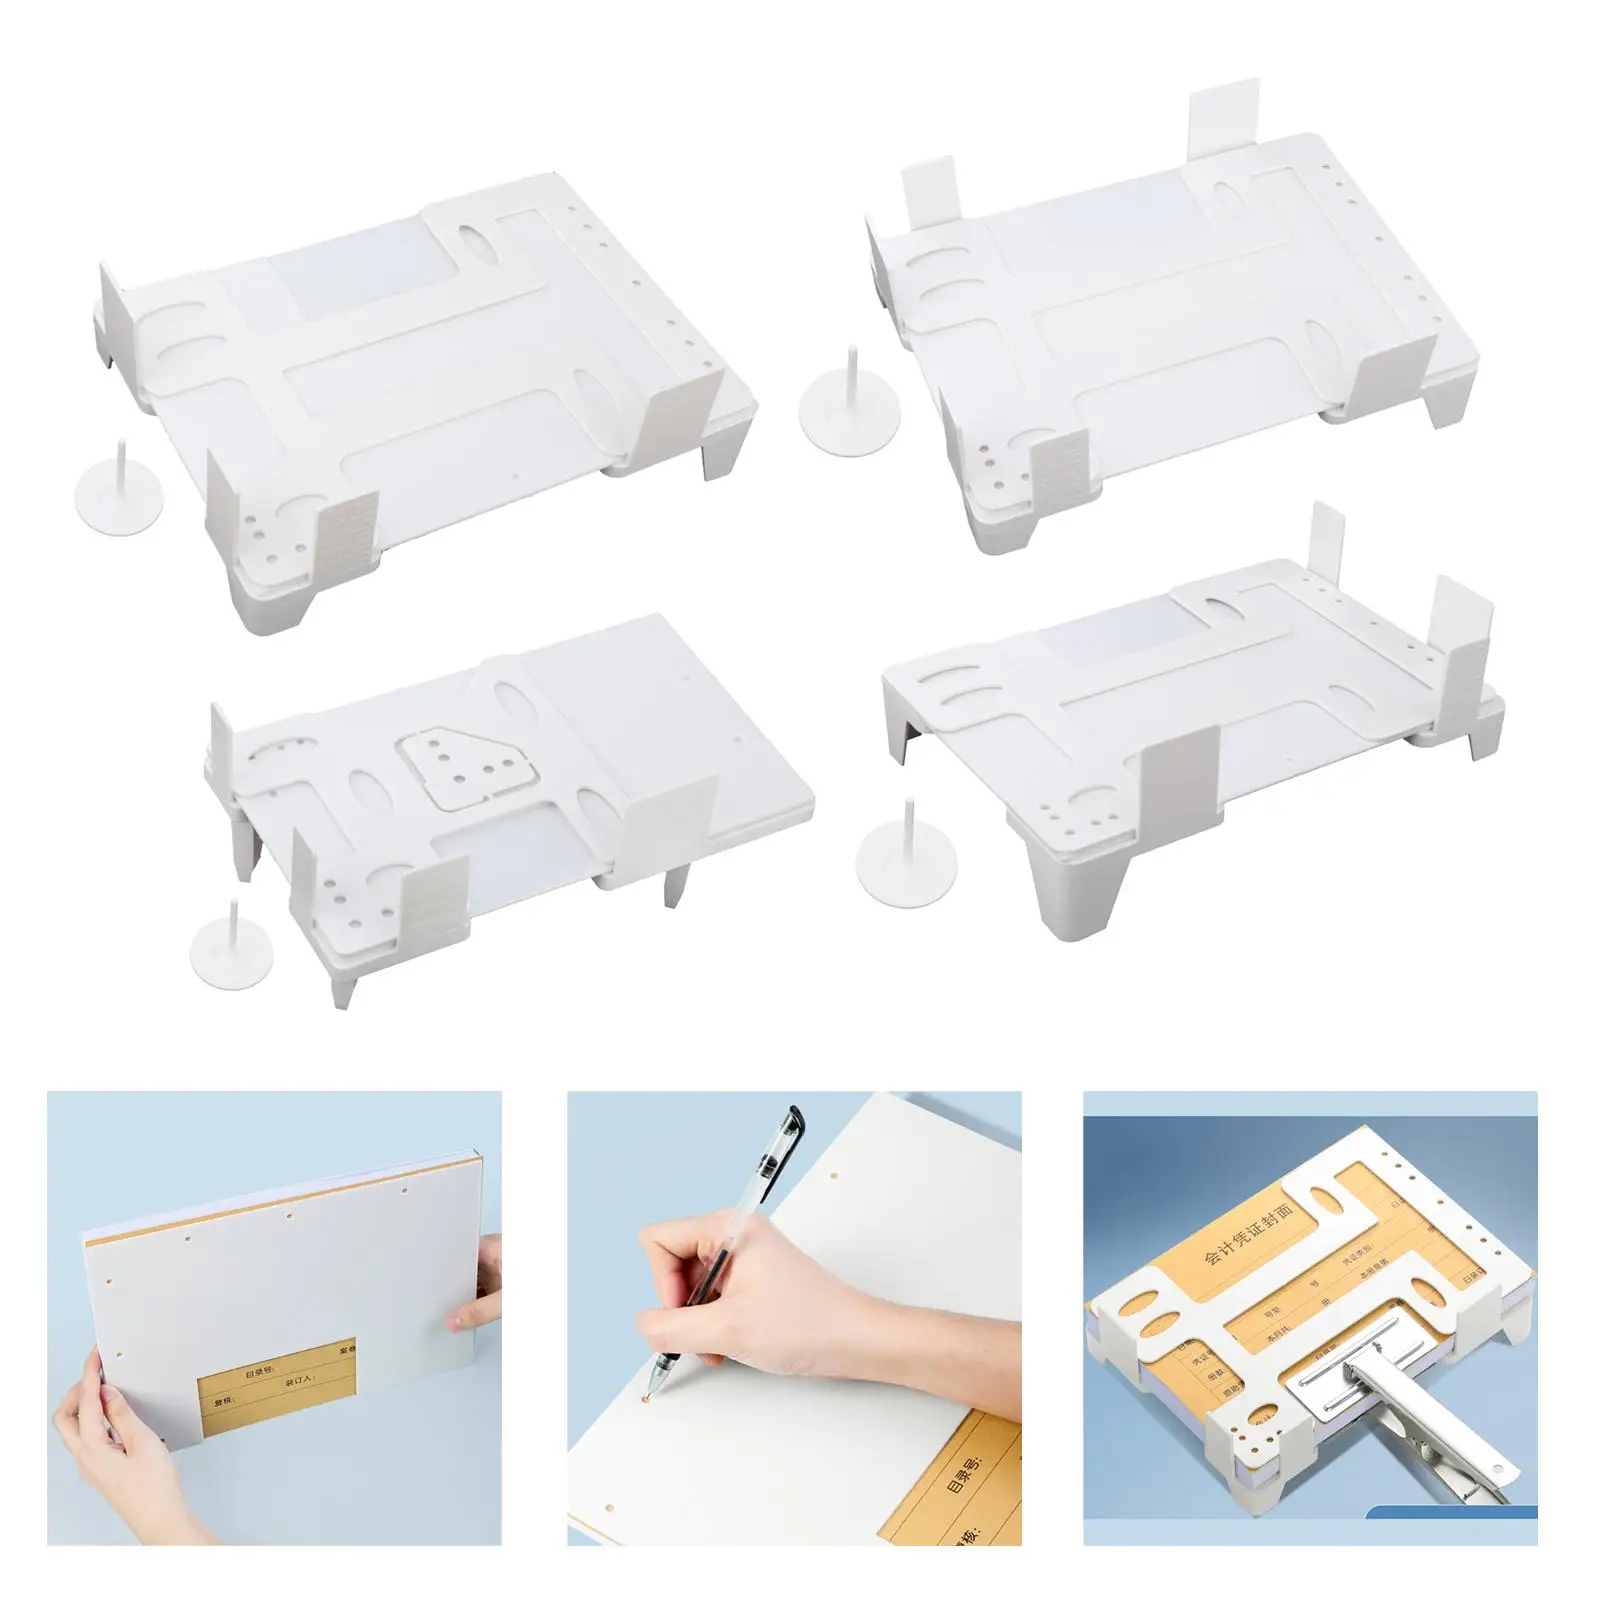 Invoice Binding Organizer Multi Functional Binding Aid for Receipt Ticket Accounting